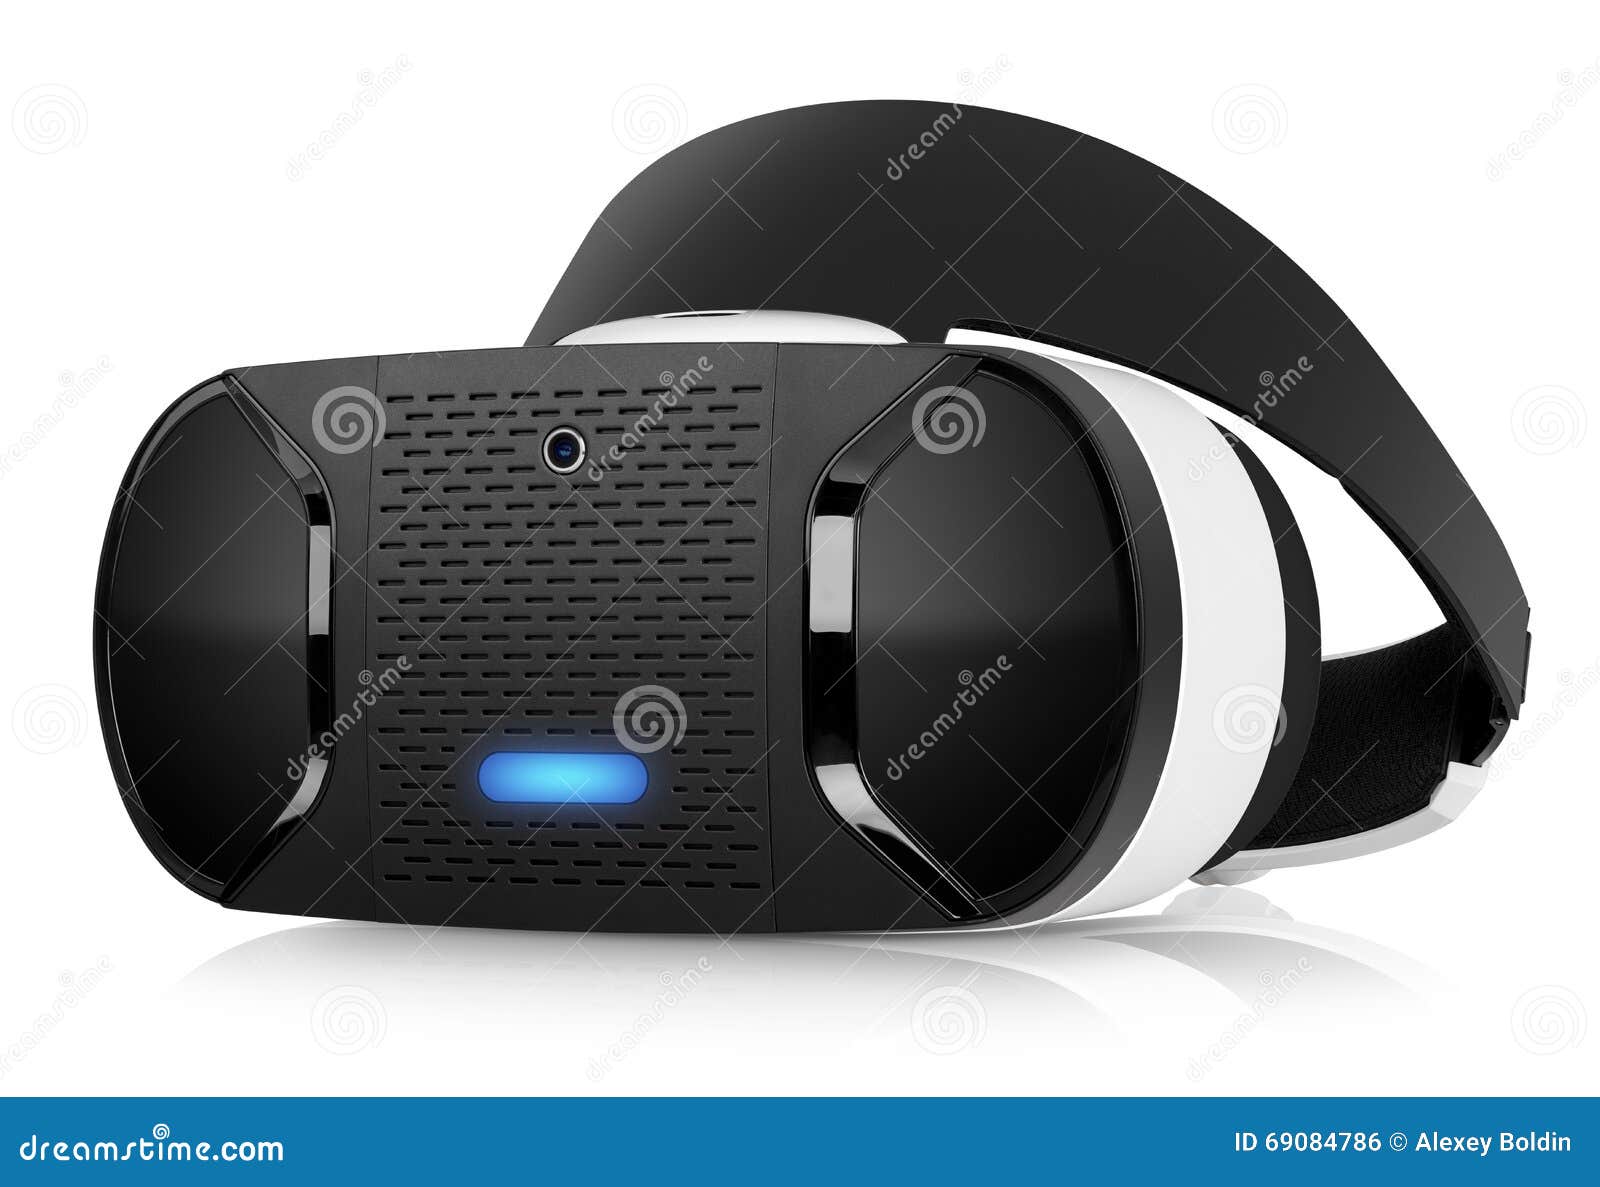 vr virtual reality headset half turned front view